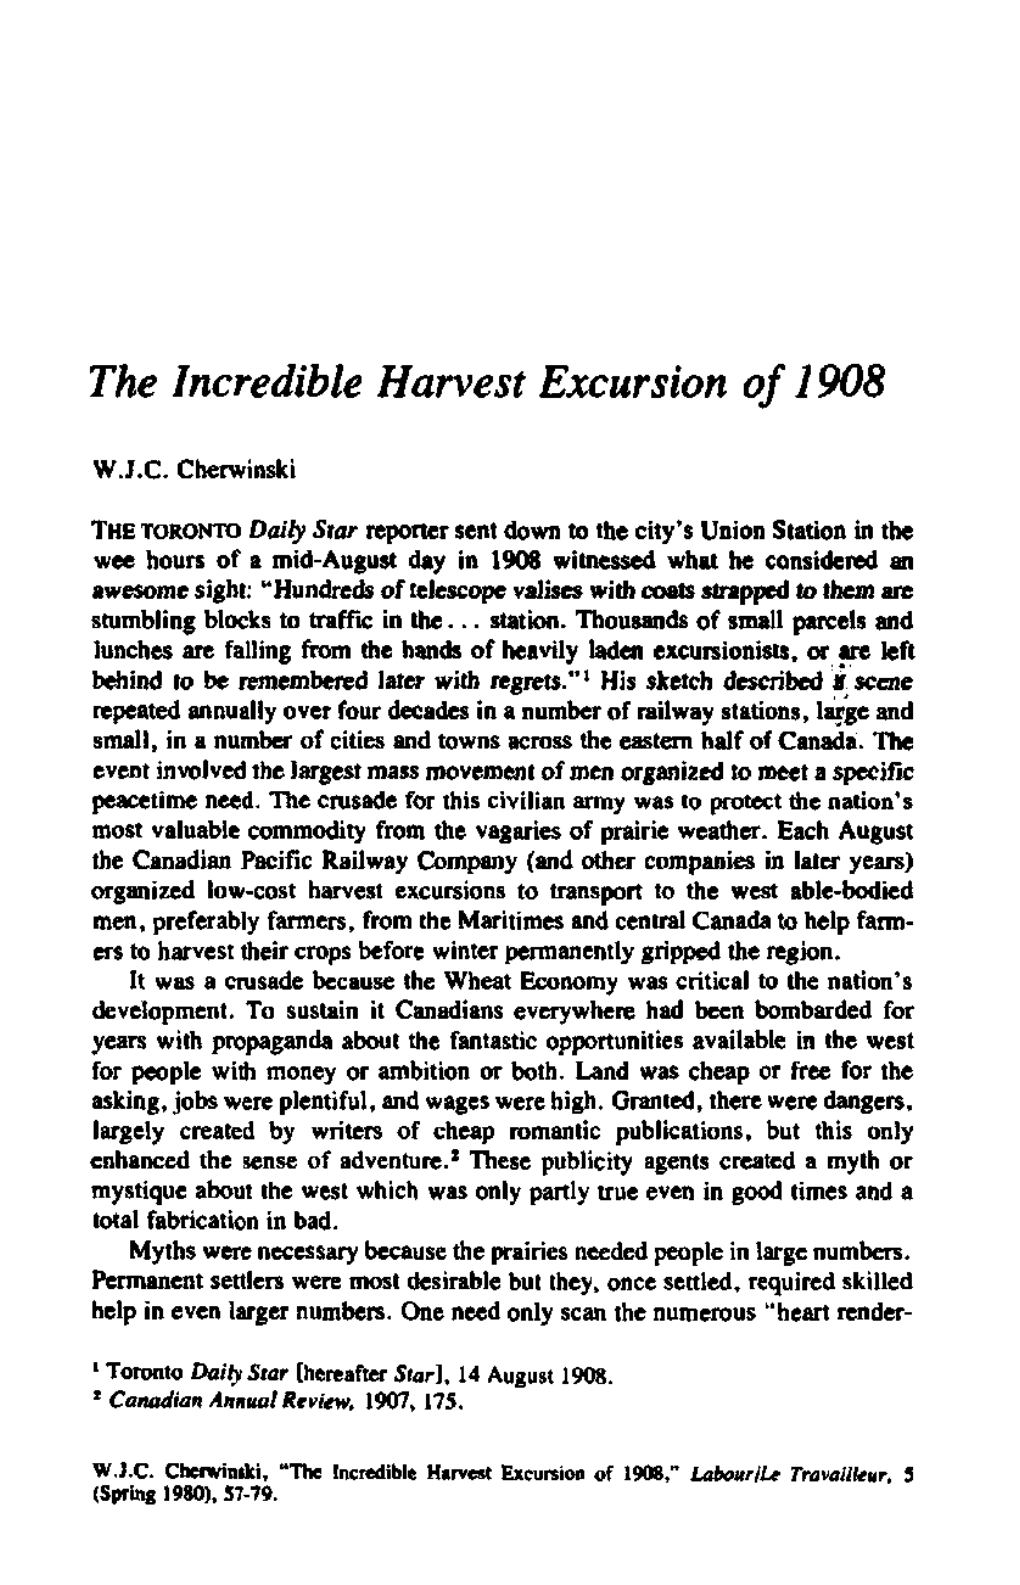 The Incredible Harvest Excursion of 1908